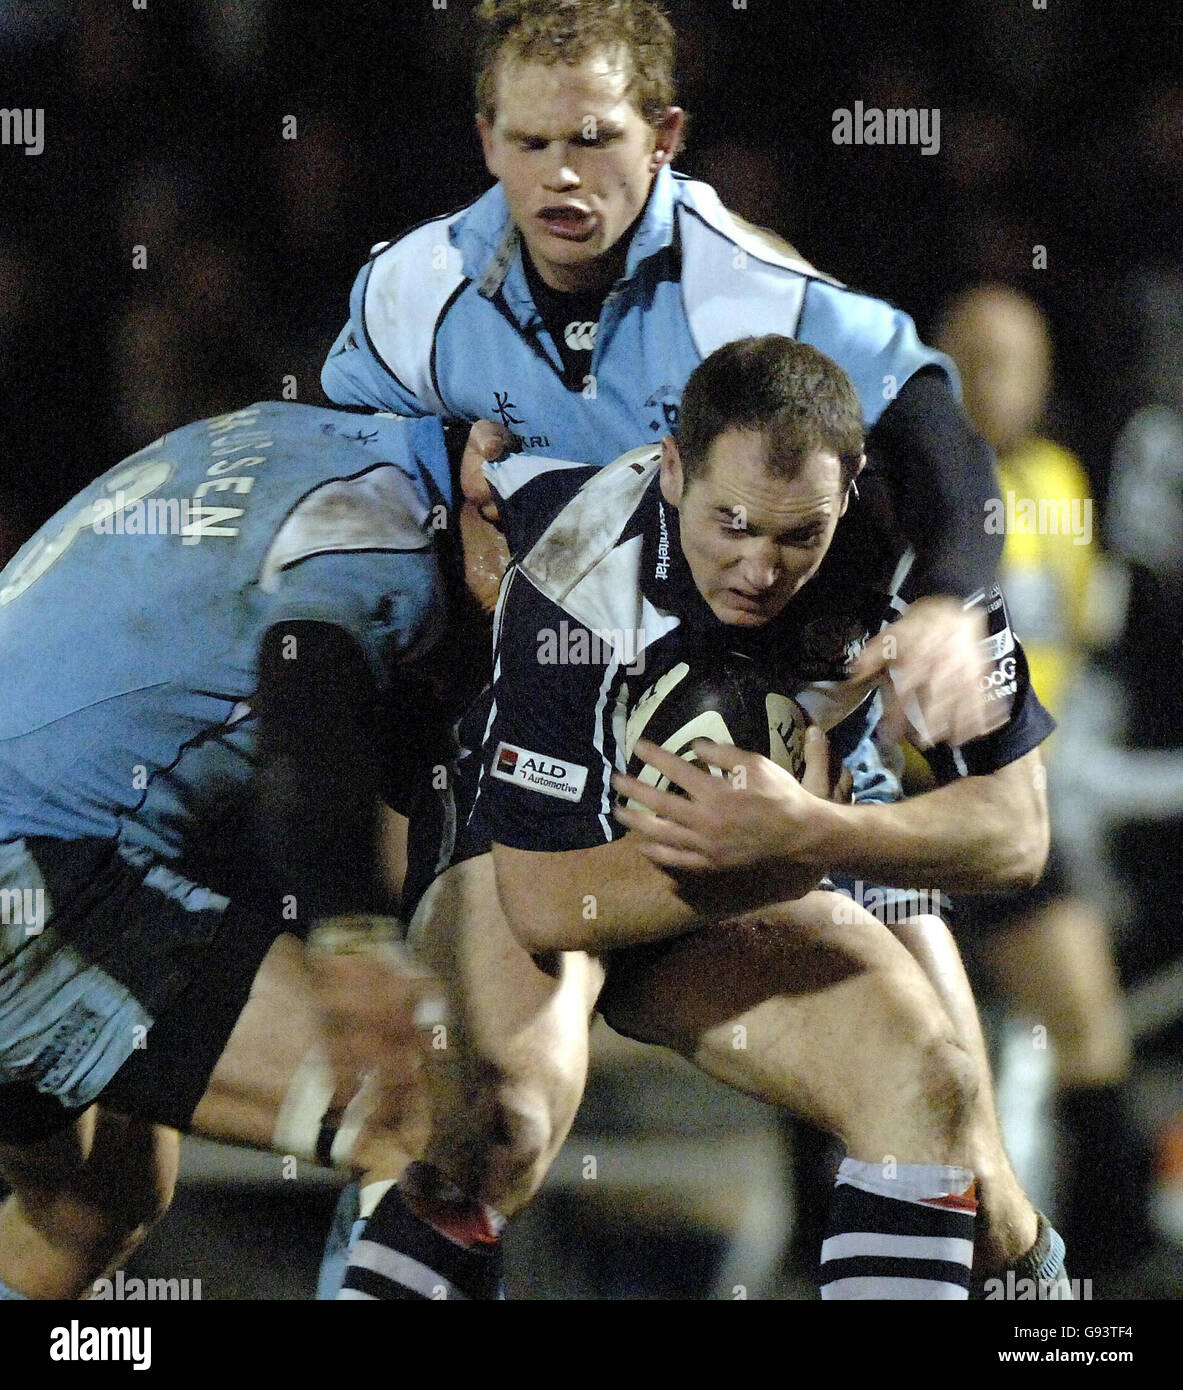 Bristol Shoguns' Shaun Perry (R) is caught by Worcester Warriors' Dale Rasmussen during the Guinness Premiership match at The Memorial Stadium, Bristol, Friday January 27, 2006. PRESS ASSOCIATION Photo. Photo credit should read: David Jones/PA. Stock Photo